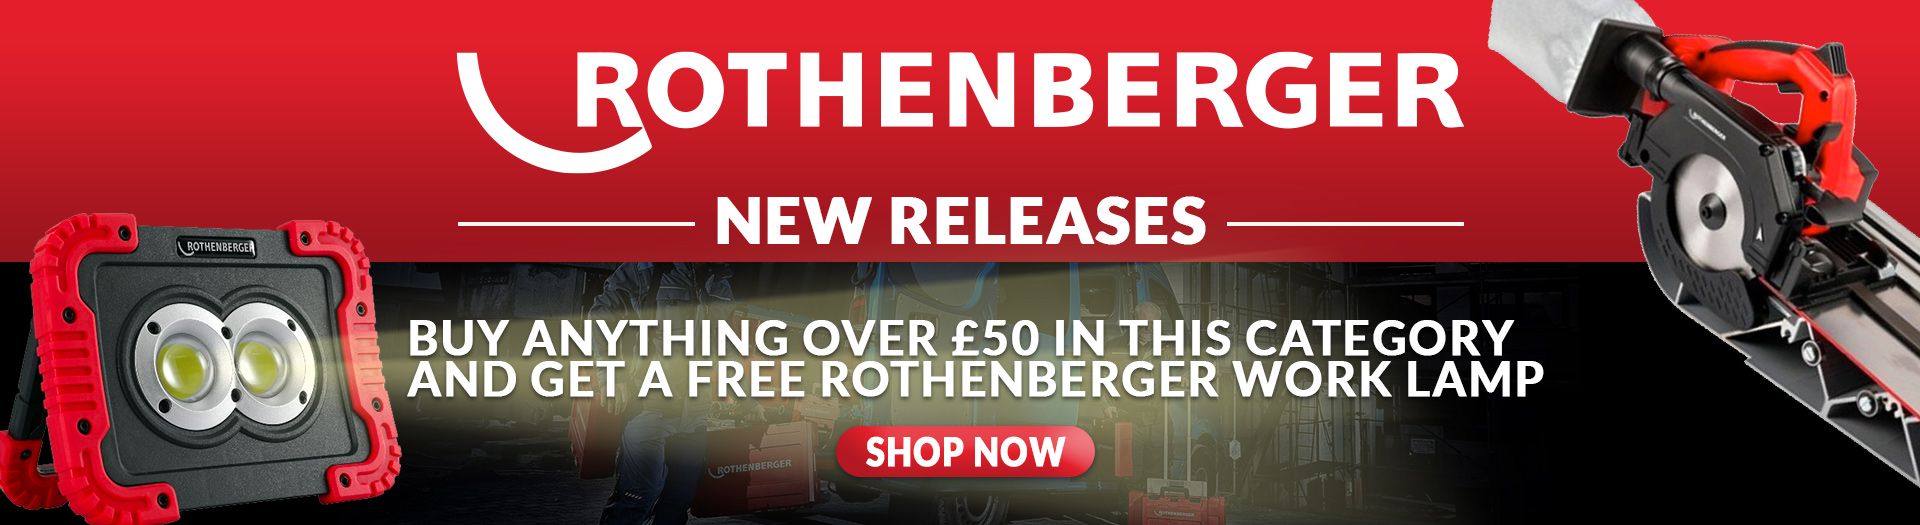 New Rothenberger